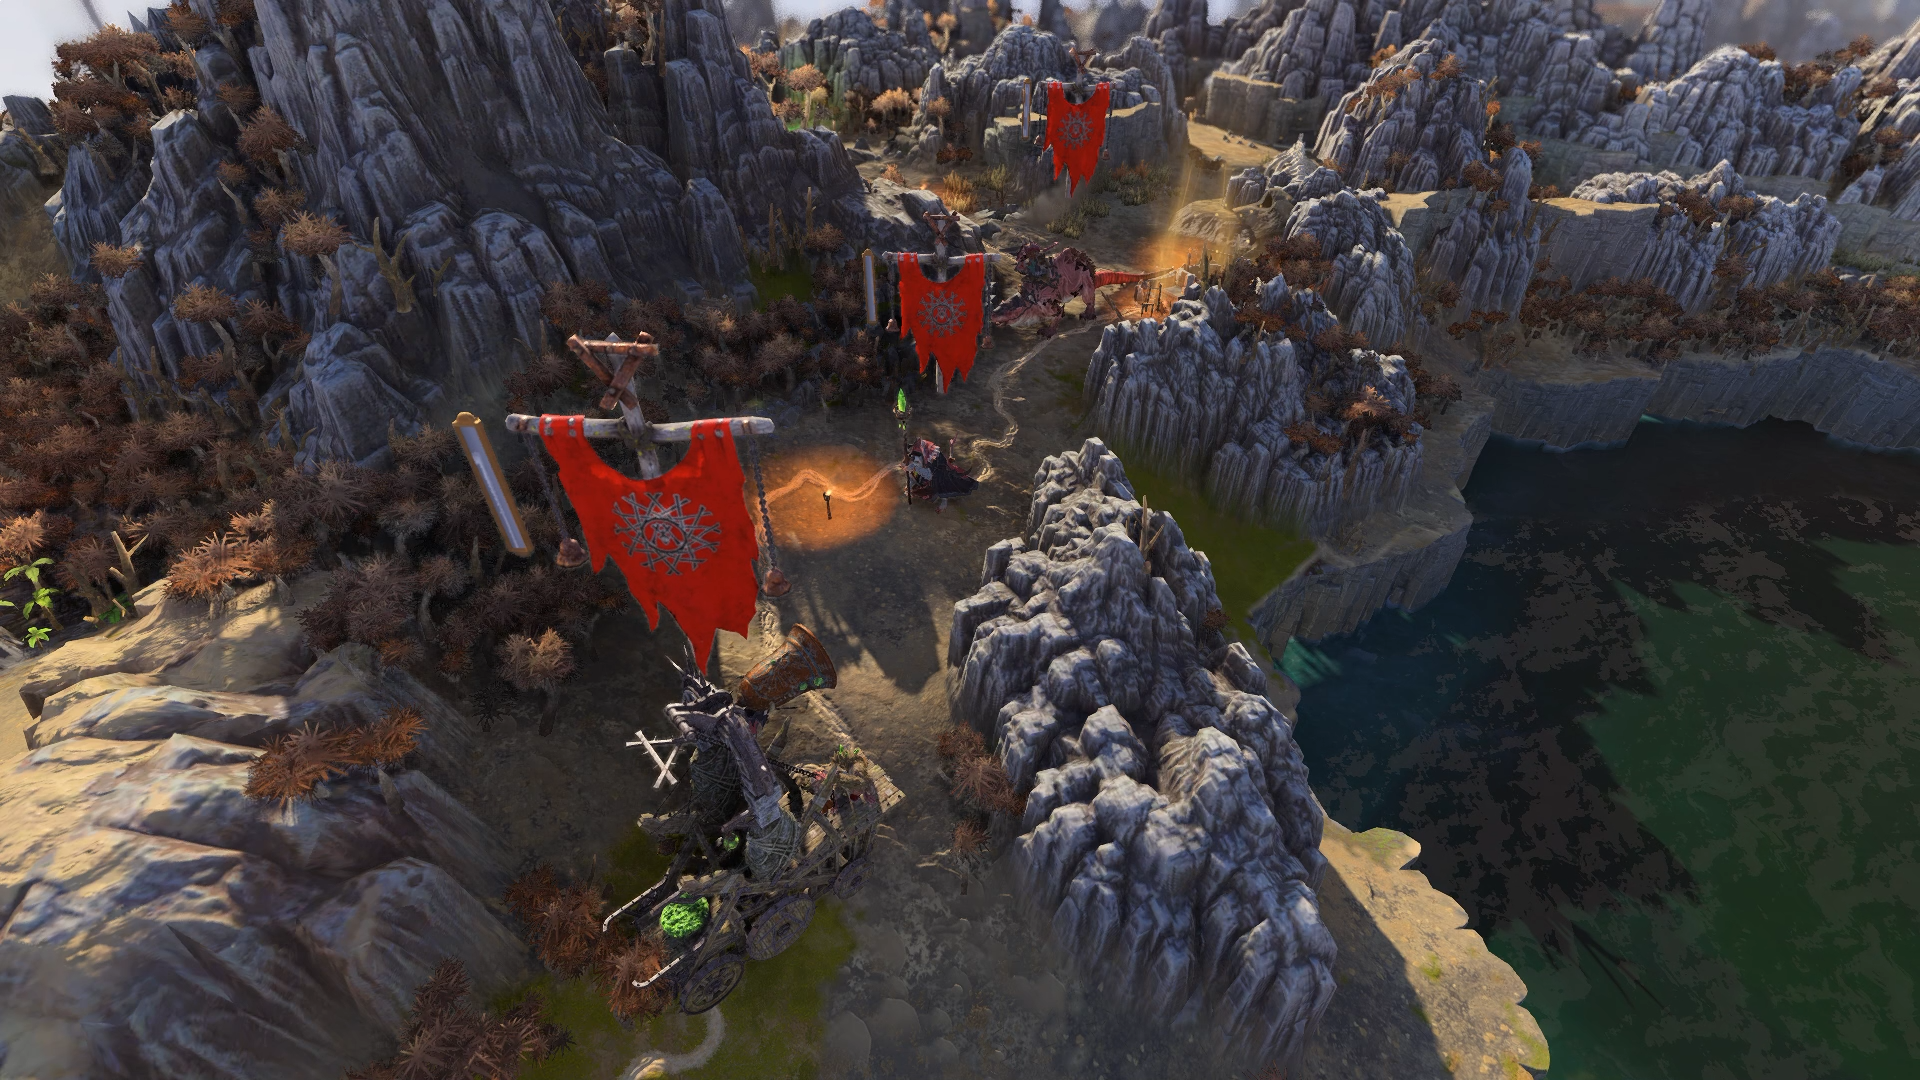 The camera looks down on a procession of skaven troops trudging single file through a rocky outcrop, their large red banners held aloft.